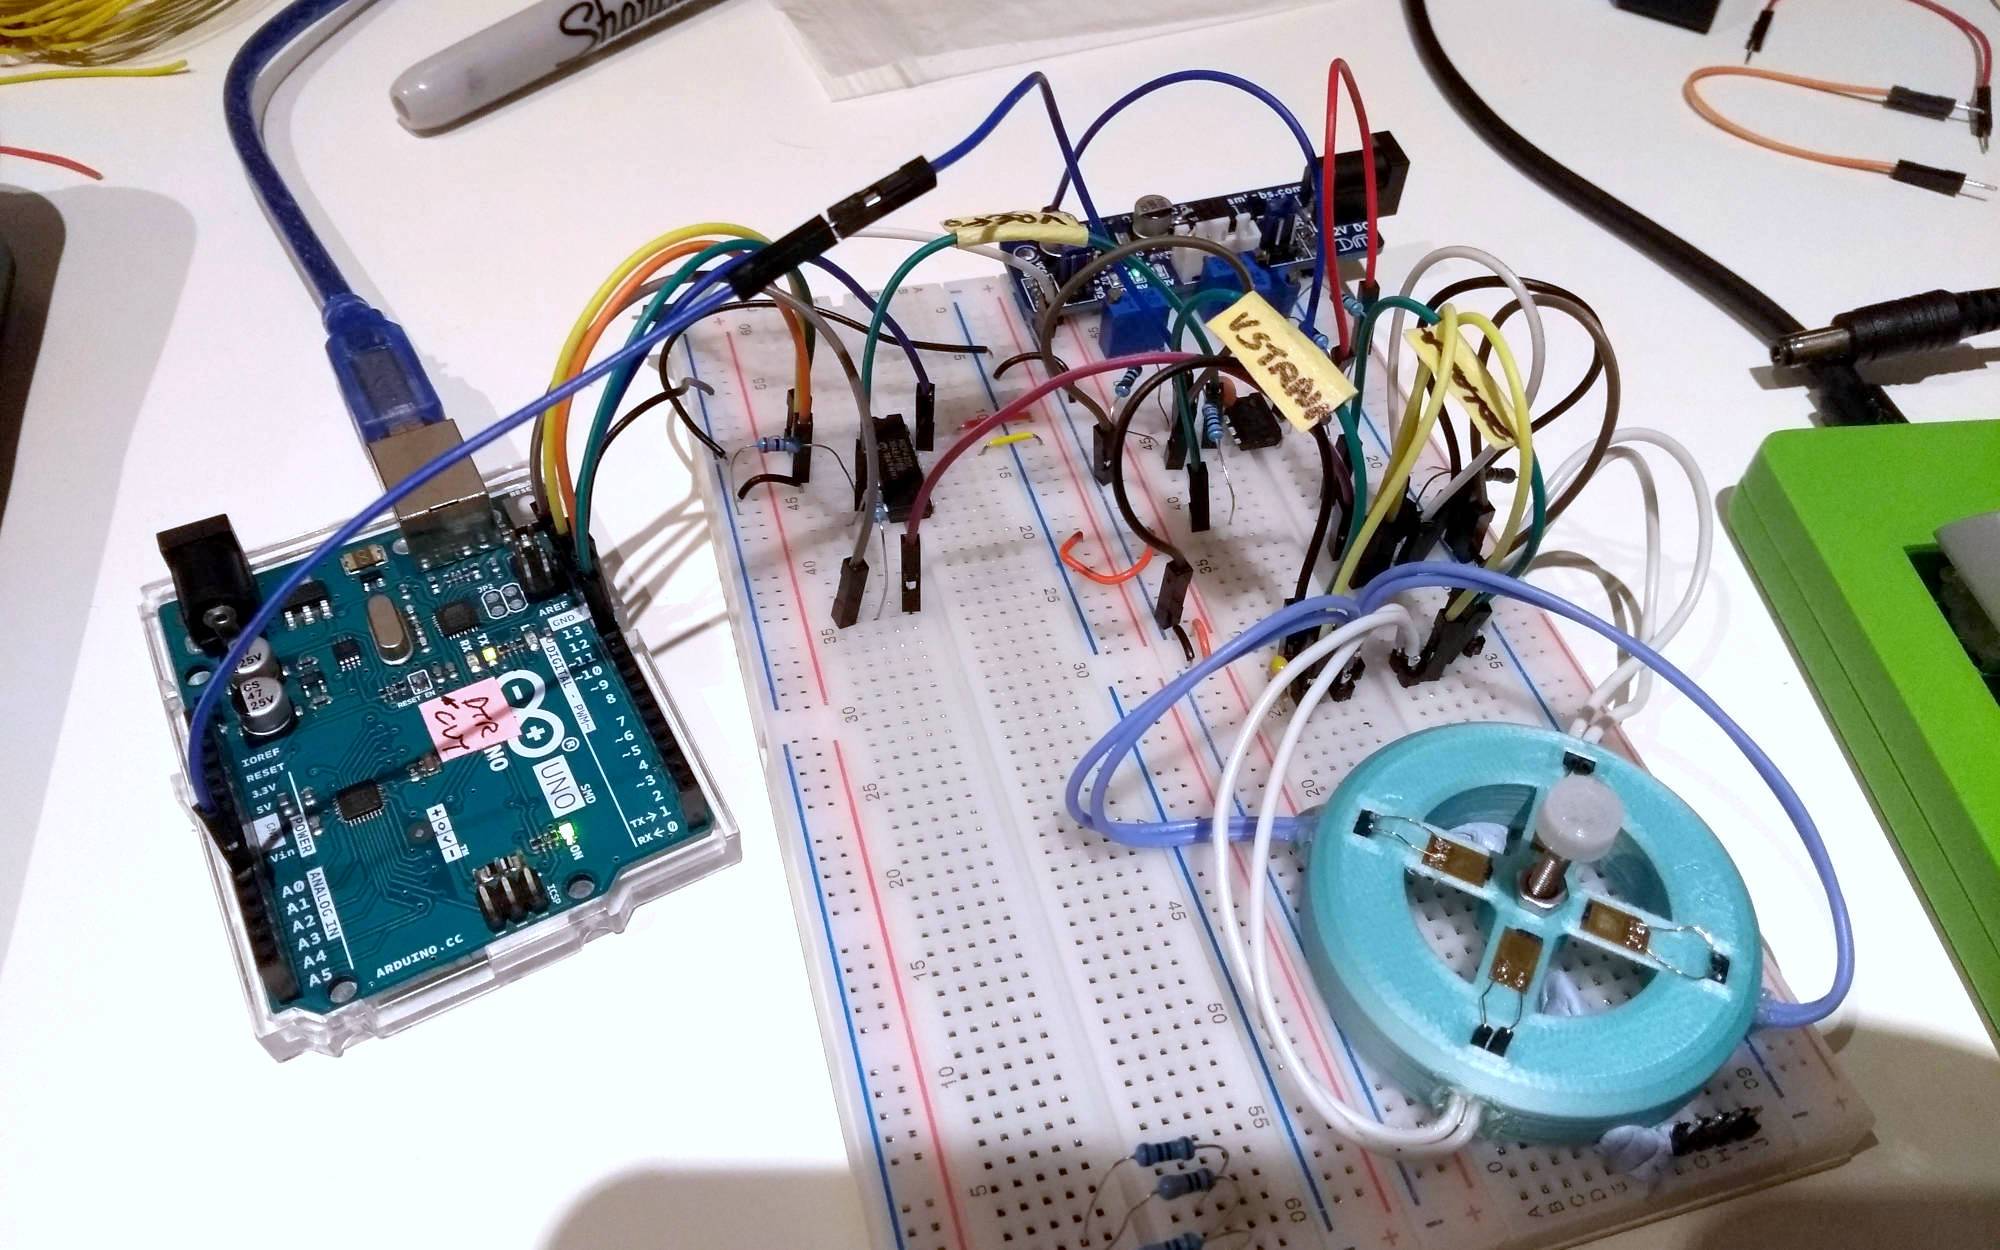 A mess of wires on a breadboard, with the pointing stick prototype on one side and an Arduino on another